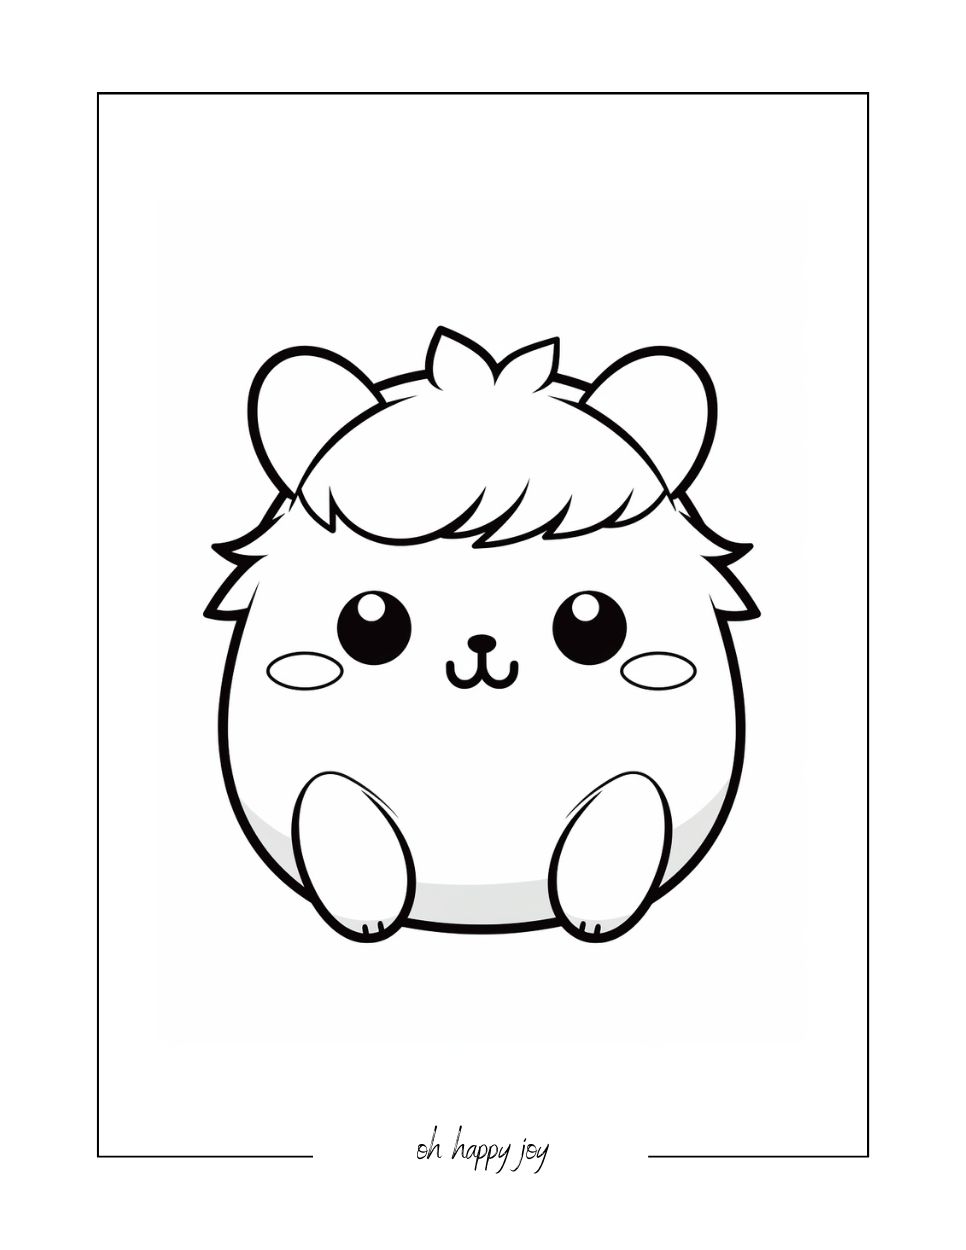 Squishmallow mullet coloring page